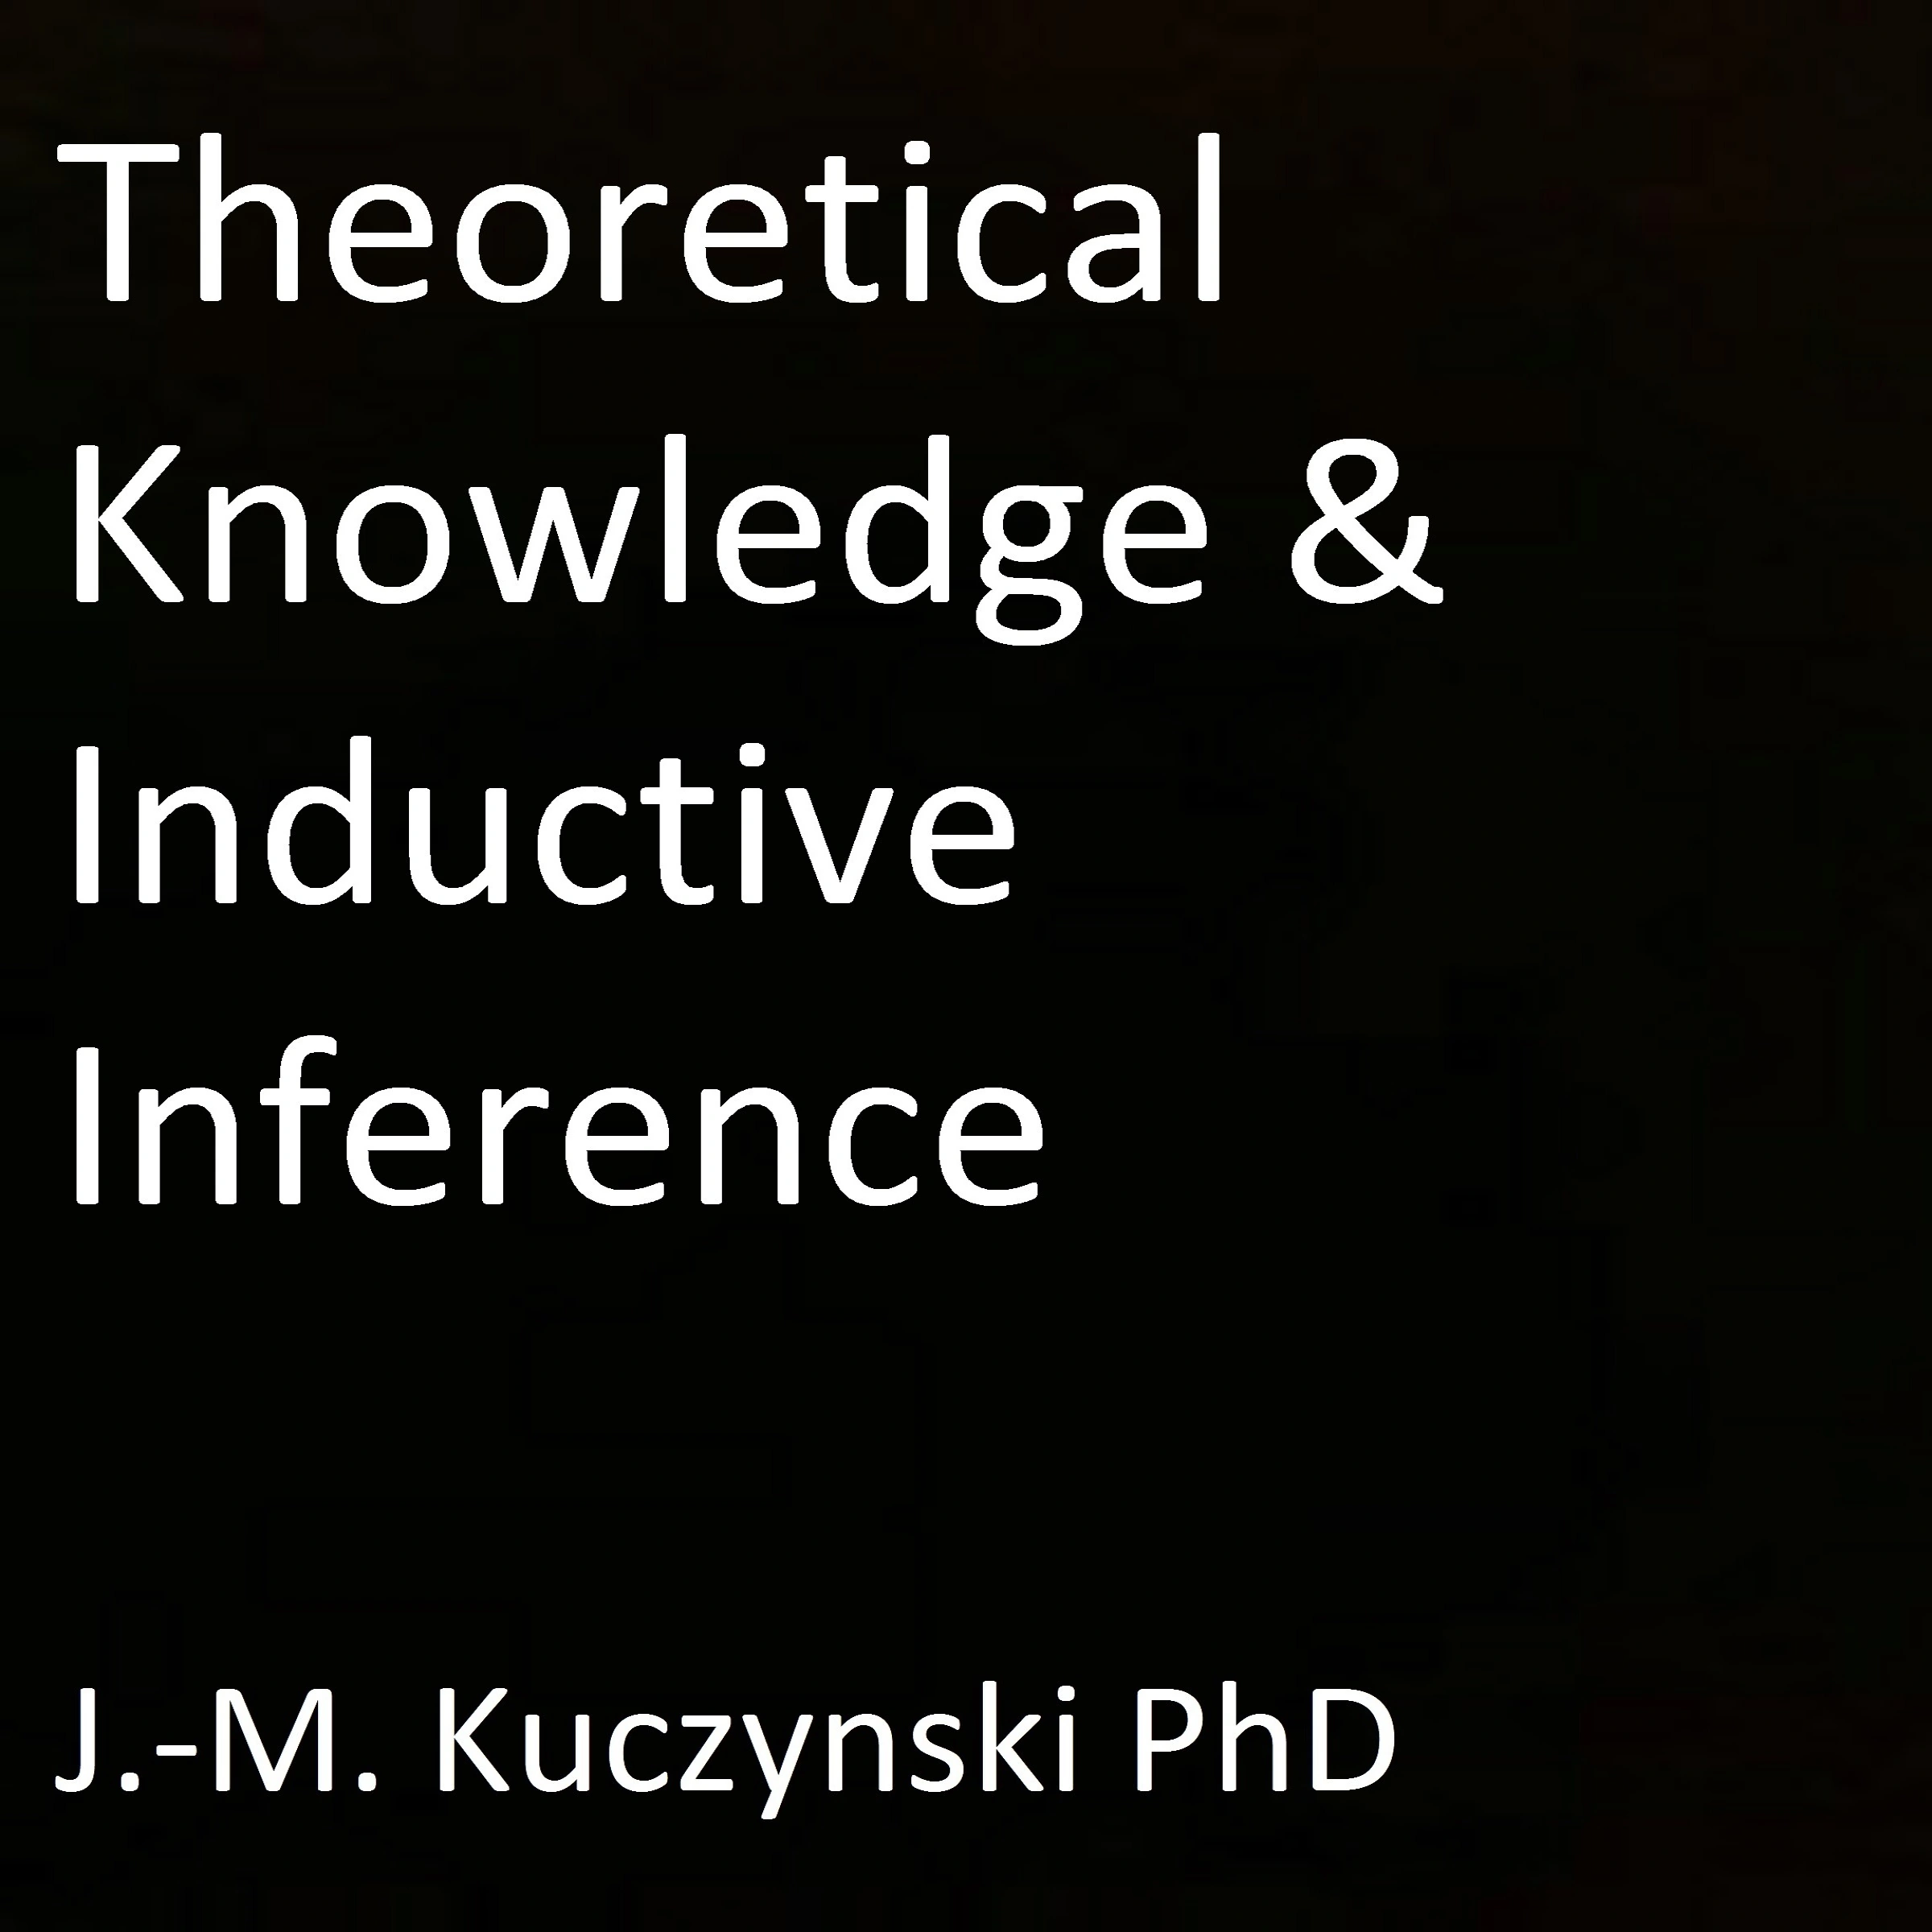 Theoretical Knowledge and Inductive Inference Audiobook by J.-M. Kuczynski